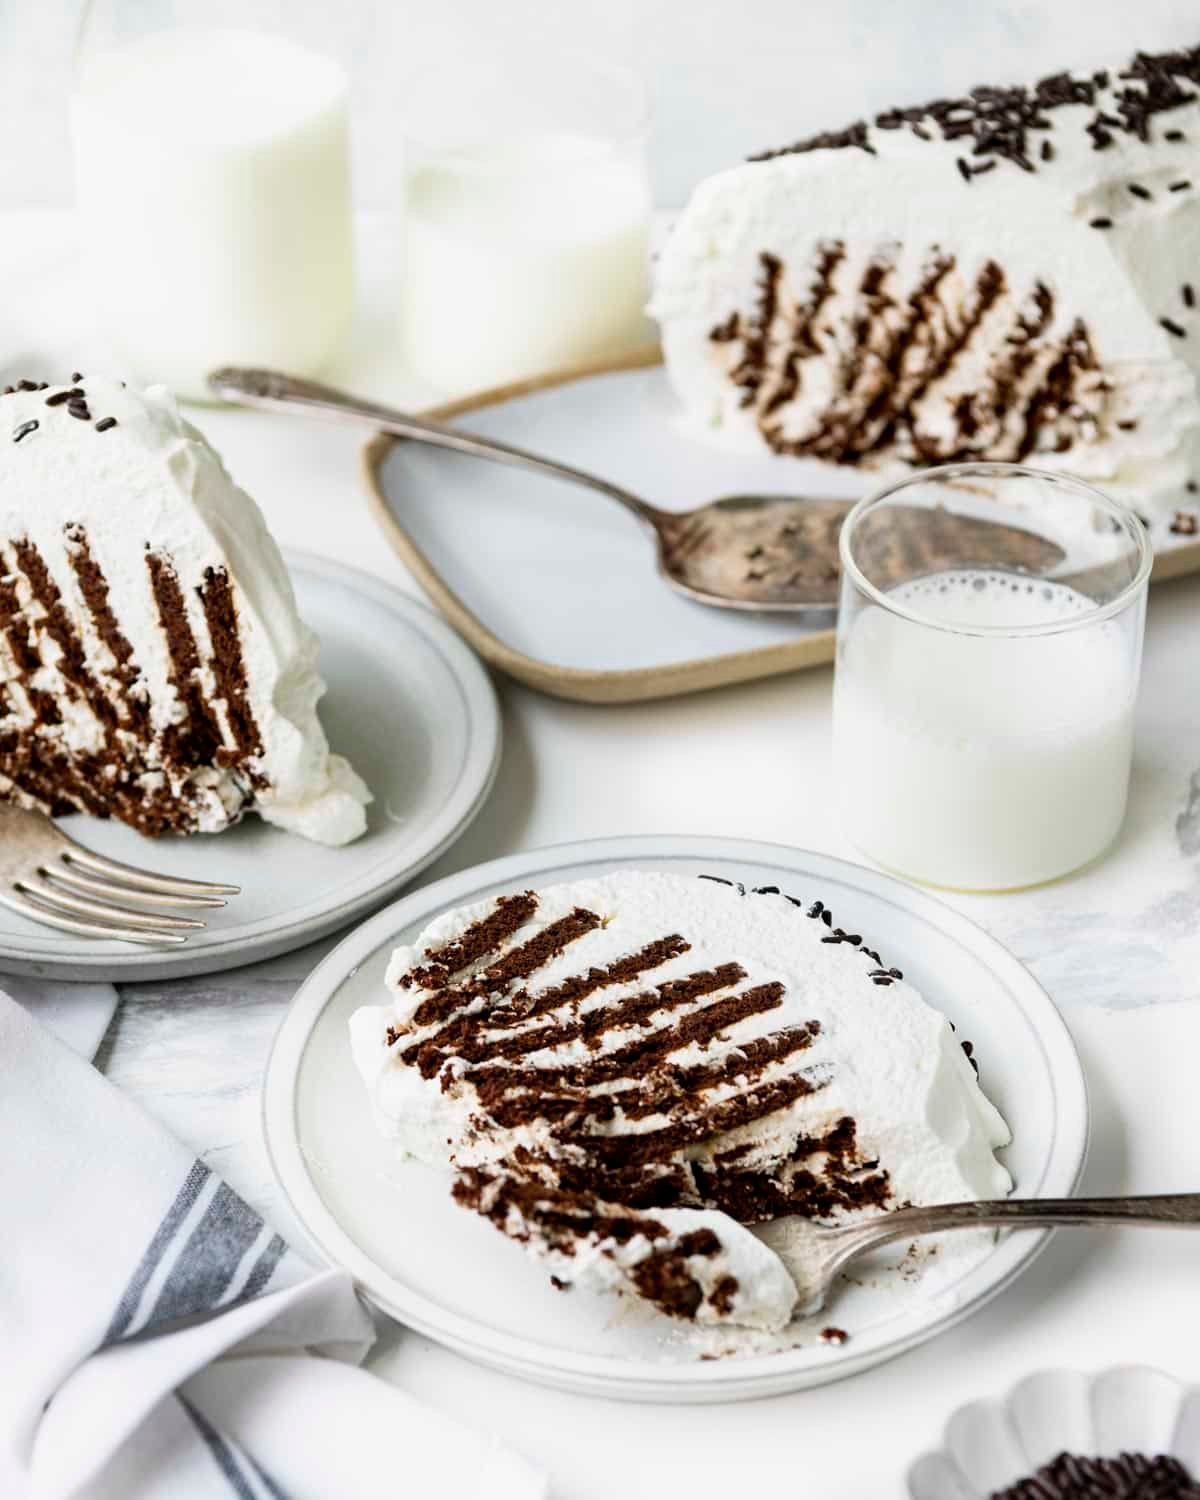 Slices of old fashioned icebox cake on a white table.